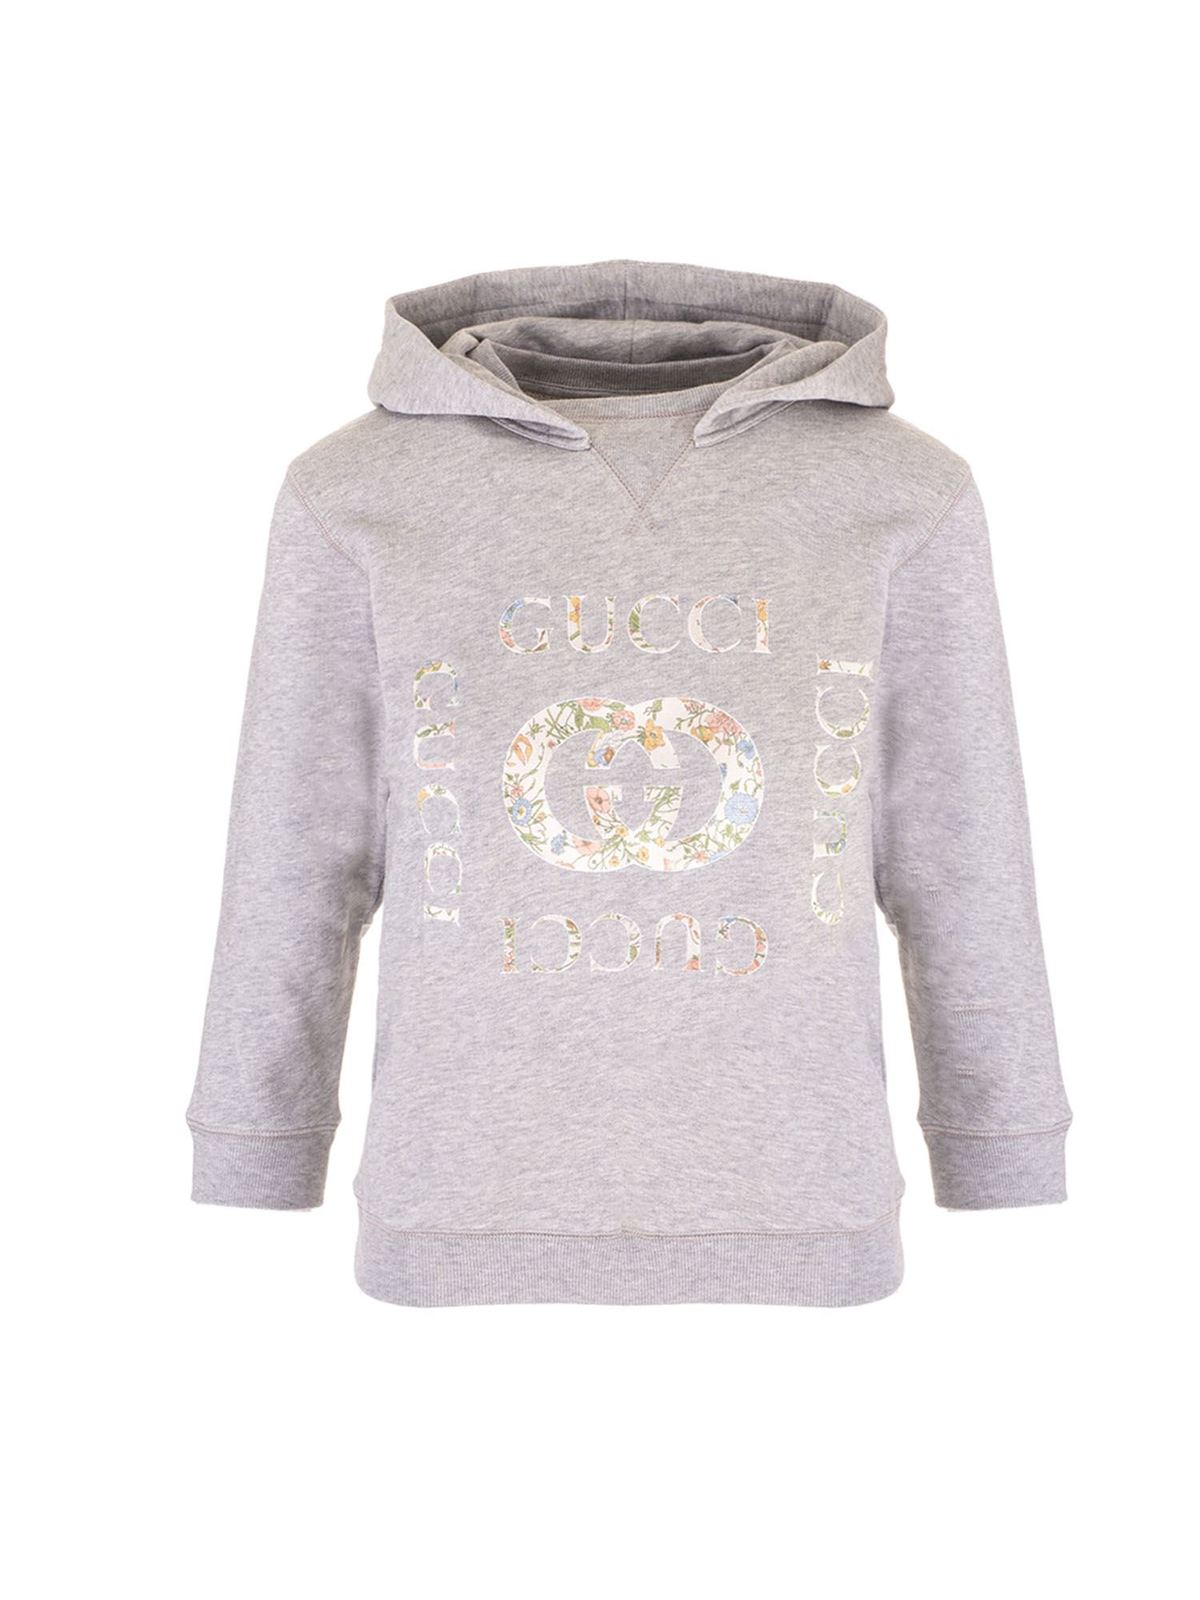 GUCCI FLORAL GG HOODIE IN grey